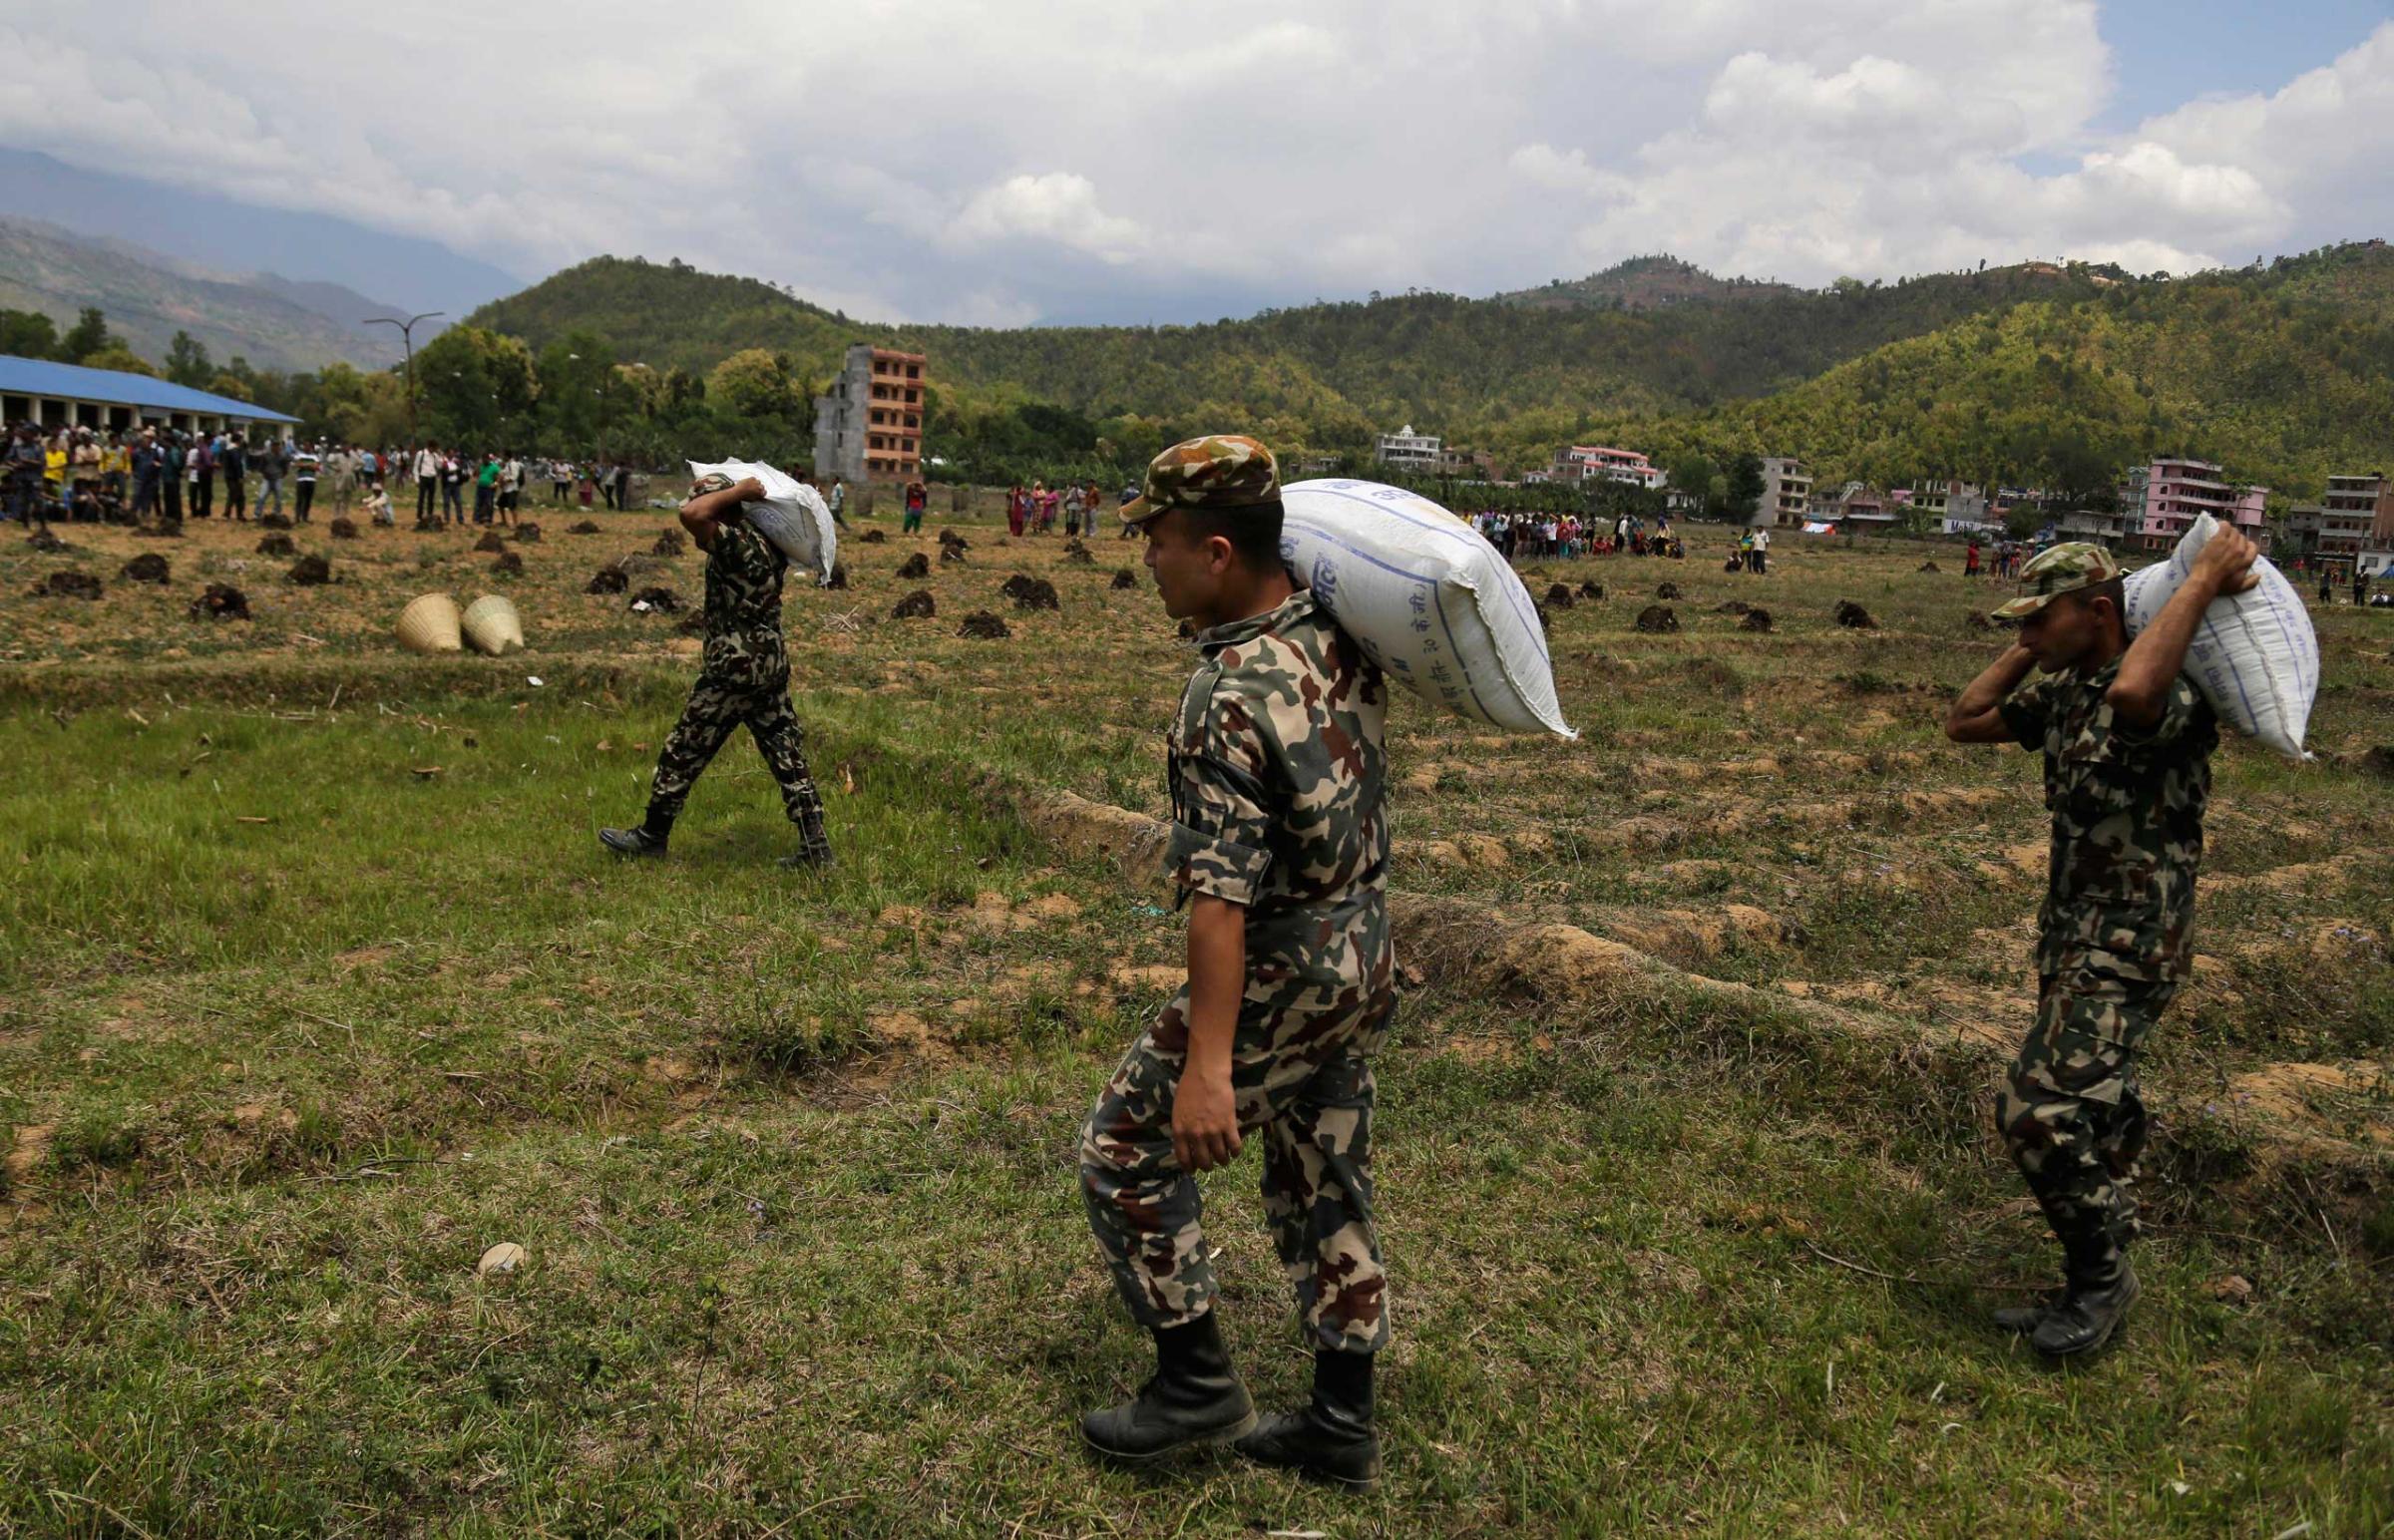 Nepalese soldiers unload relief material brought in an Indian air force helicopter for victims of Saturdayís earthquake at Trishuli Bazar in Nepal on April 27, 2015.